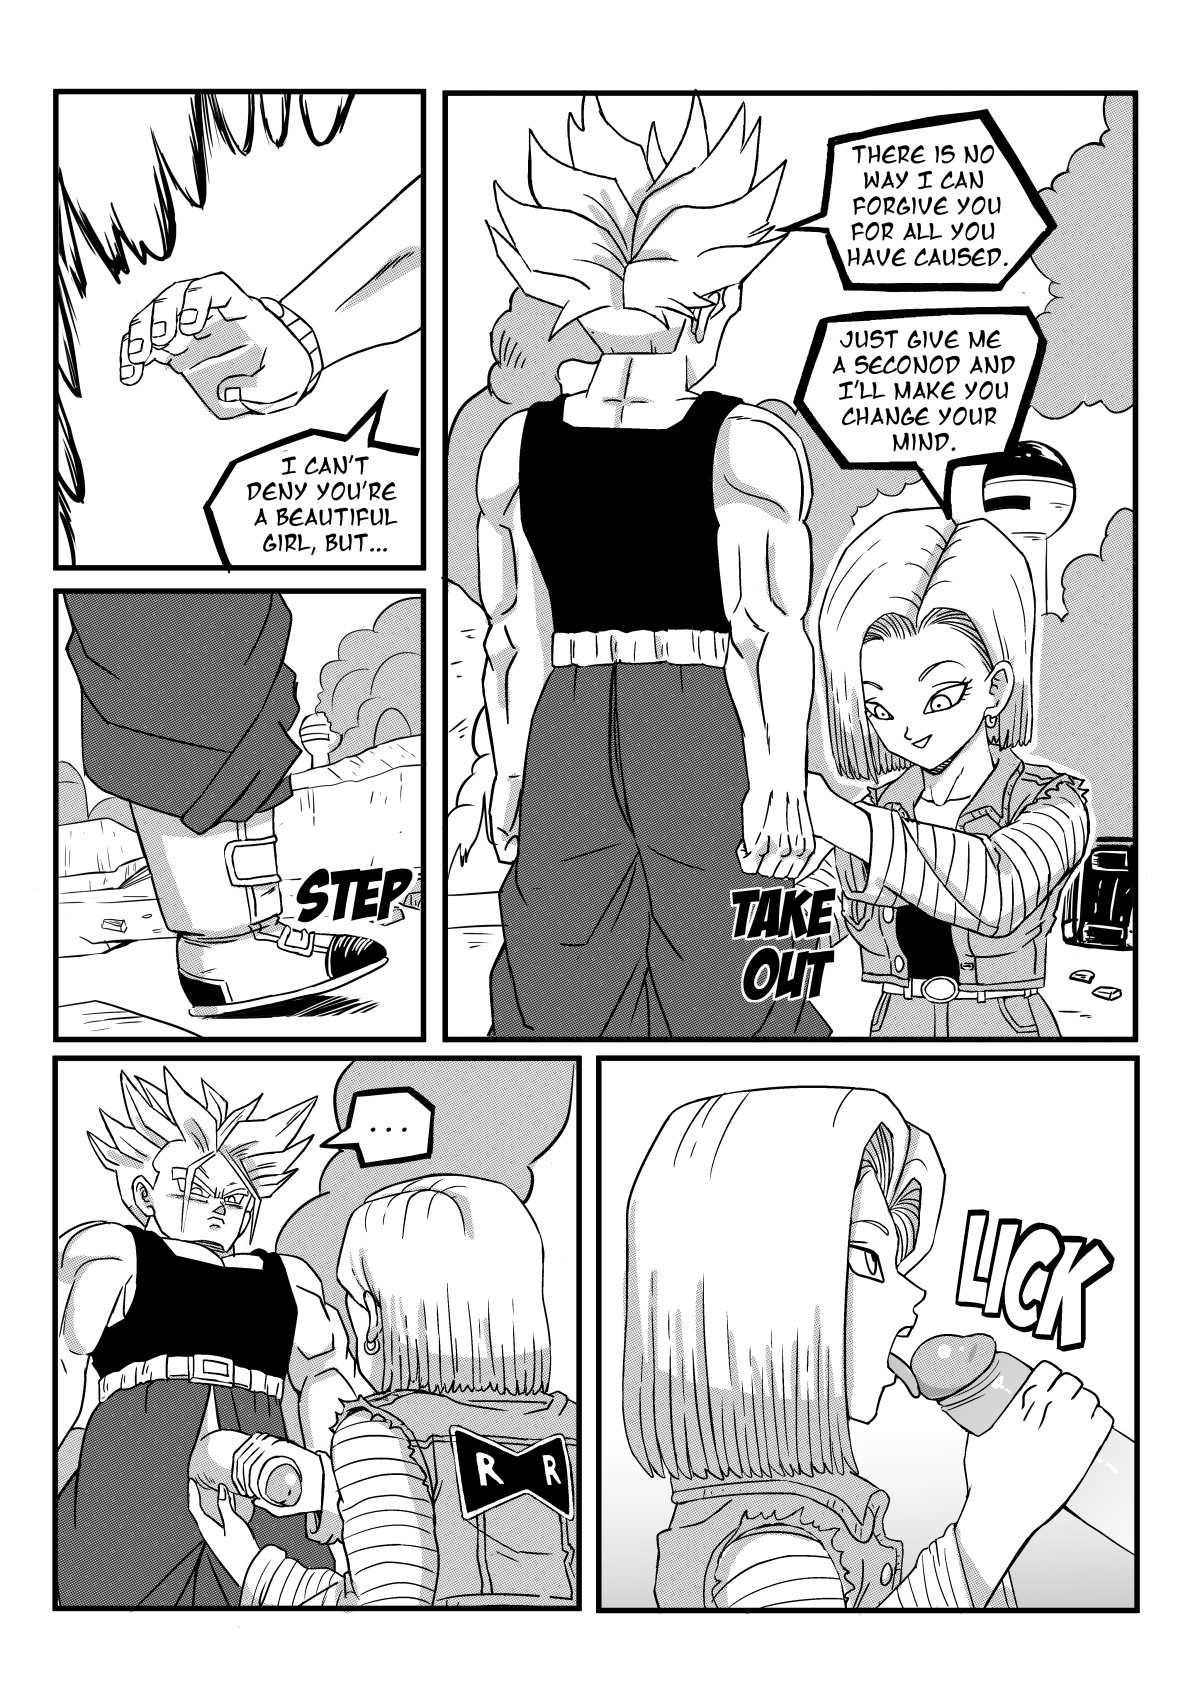 Trunks Android 18 Porn Comic - Android 18 Stays in the Future - PinkPawg - KingComiX.com